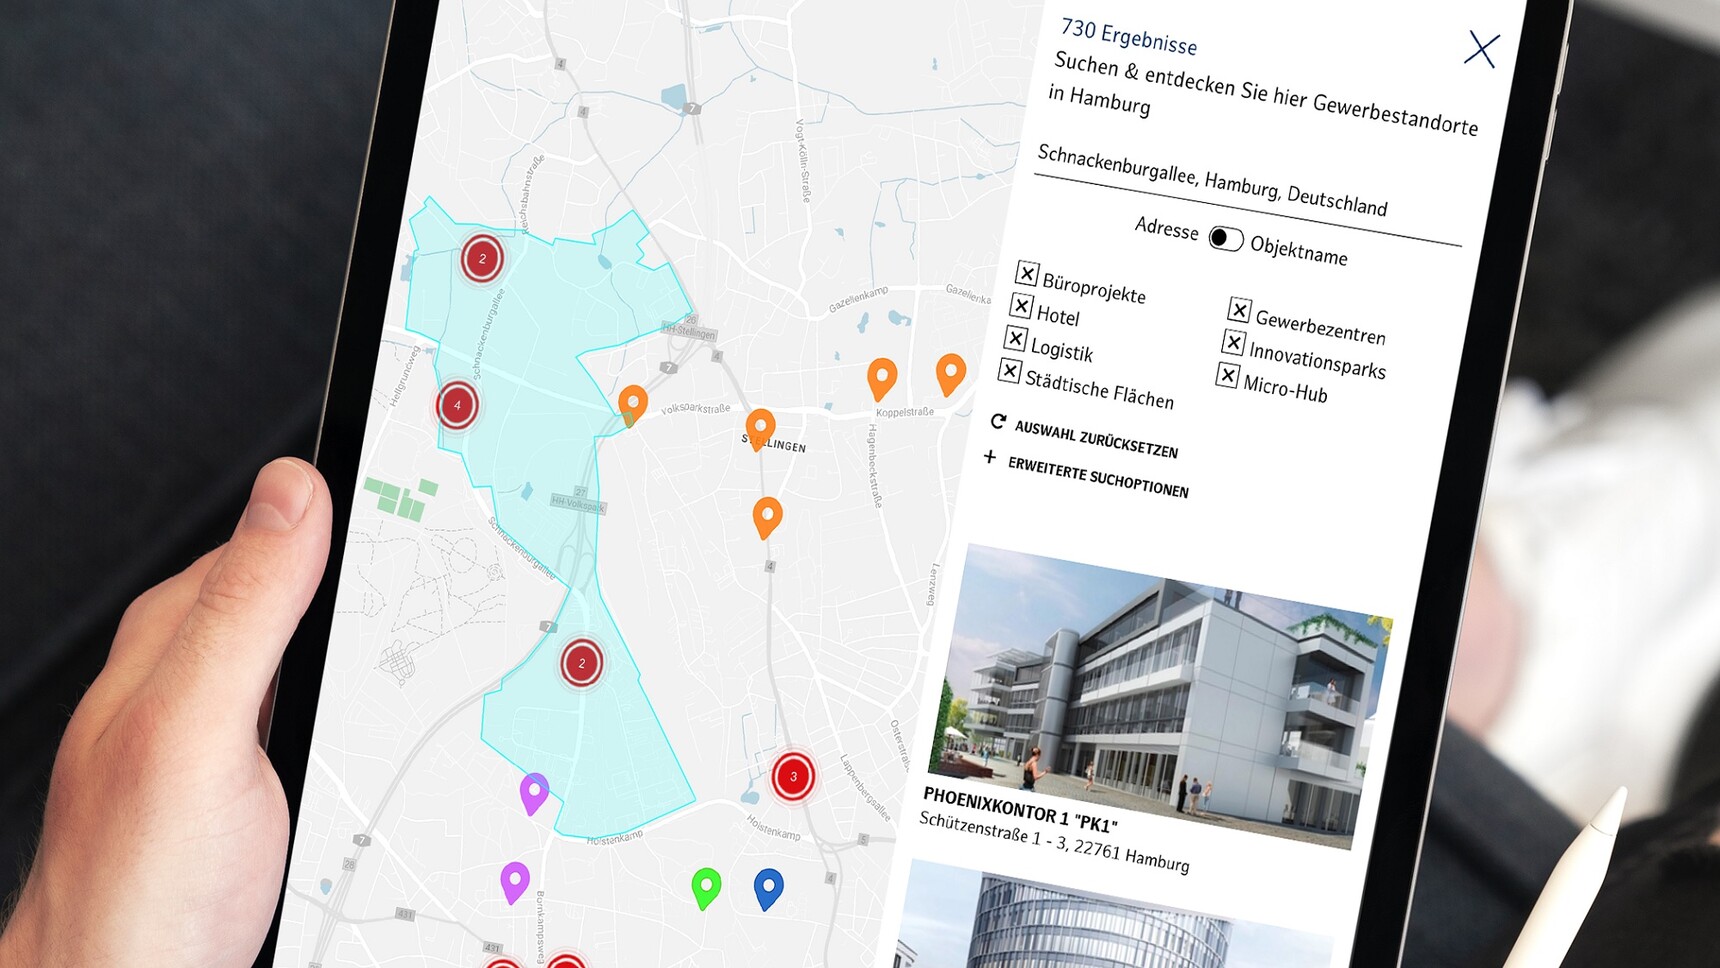 To the interactive map of the most important industrial locations in Hamburg